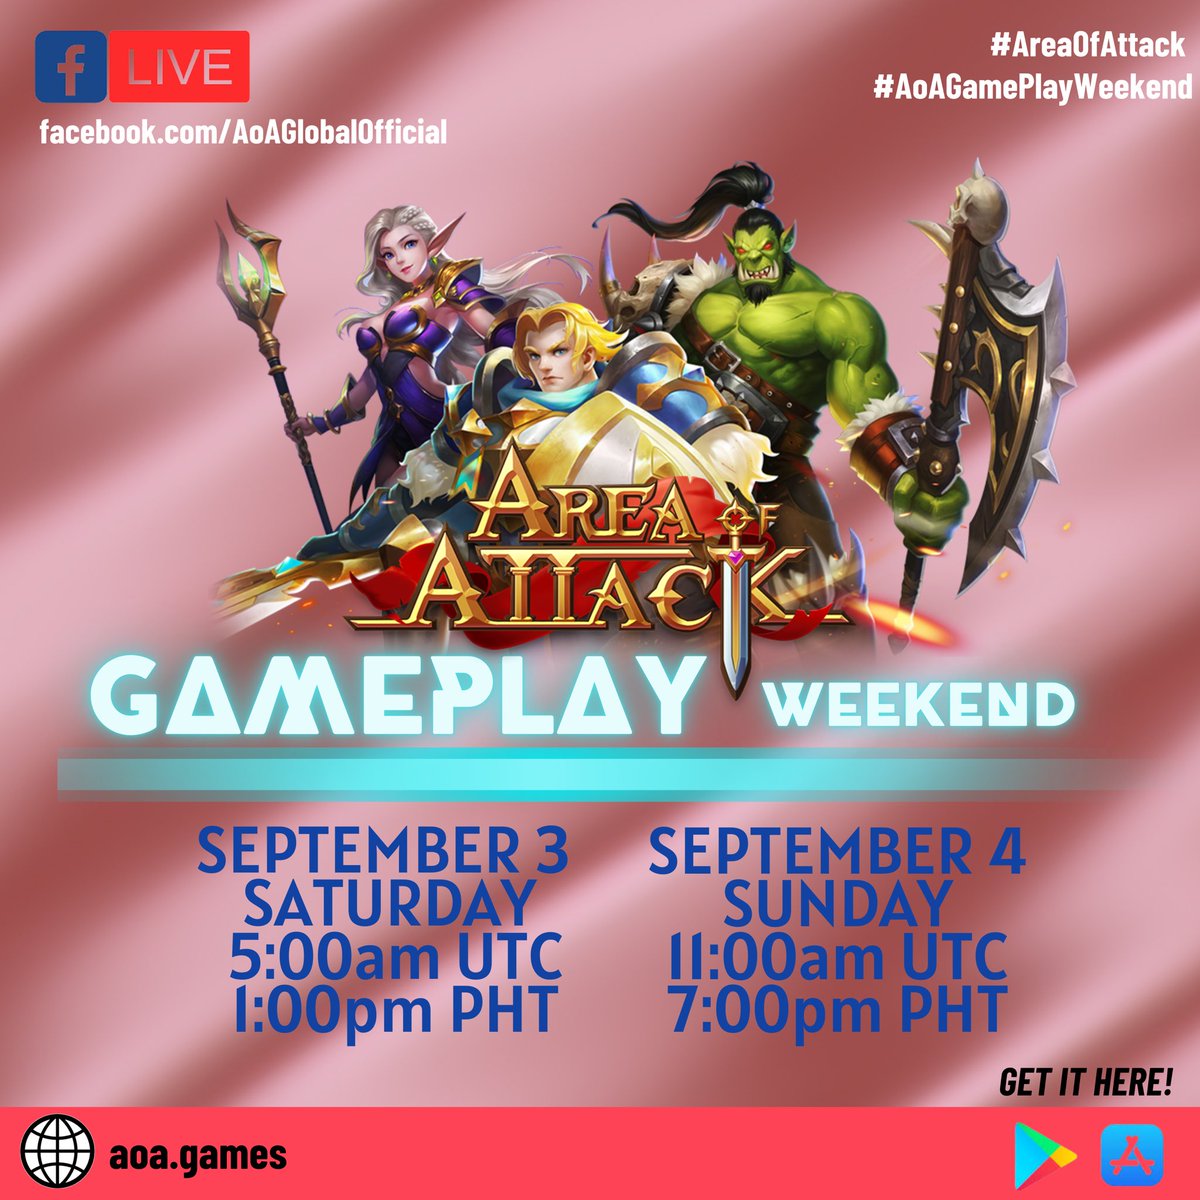 ✨ Today’s Area of Attack GamePlay Weekend ✨ SEE YOU, TEAM AoA!!! 💖 Download the game now via Google Playstore and Apple App Store. aoa.games #AreaOfAttack #AoAGamePlayWeekend #Invest #Play #Earn #MMORPG #NFT #GameFi #P2E #Play2Earn #PlayToEarn #Metaverse